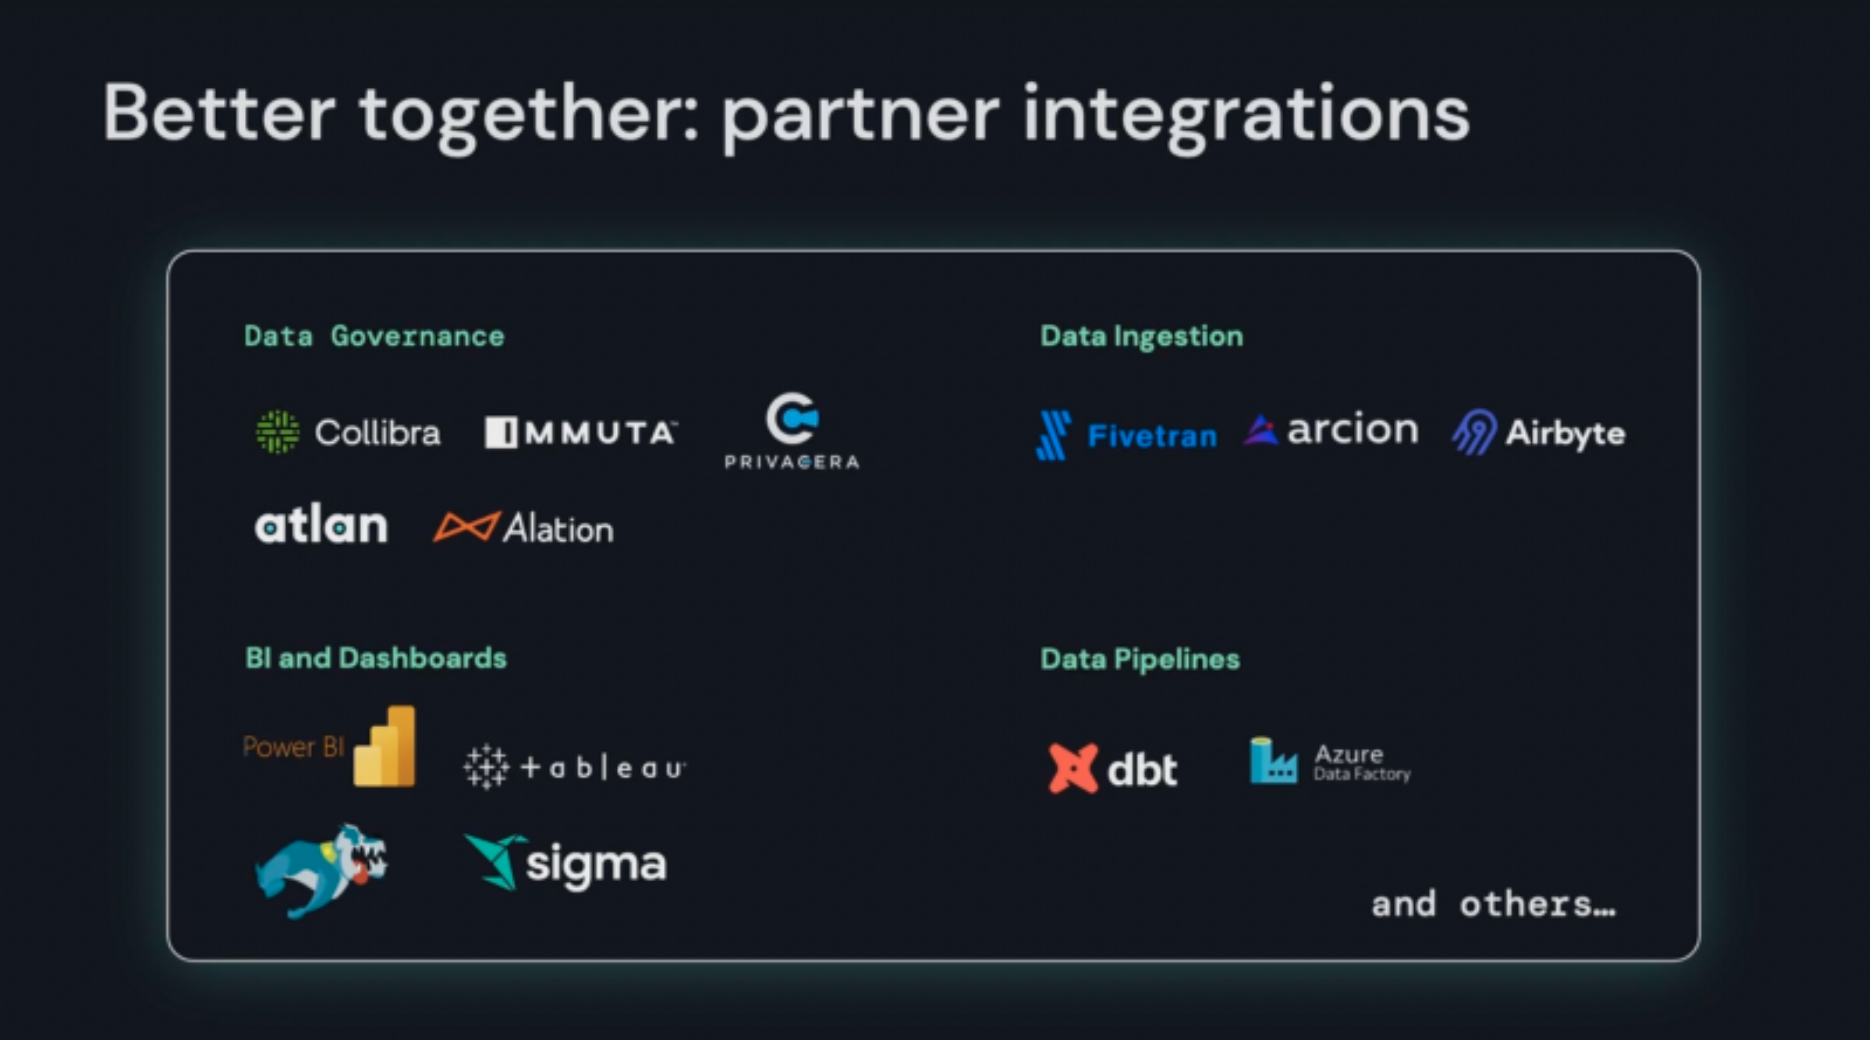 Better Together: Partner Integrations. Stardog appears under the Bi and Dashboards category, along with Power BI, Tableau, and Sigma. Other categories include Data Governance (Alation, Collibra, Atlan, Privagera, and Immuta), Data Pipelines (DBT, Azure Data Factory), and Data Ingestion (Fivetran, arcion, and airbyte)